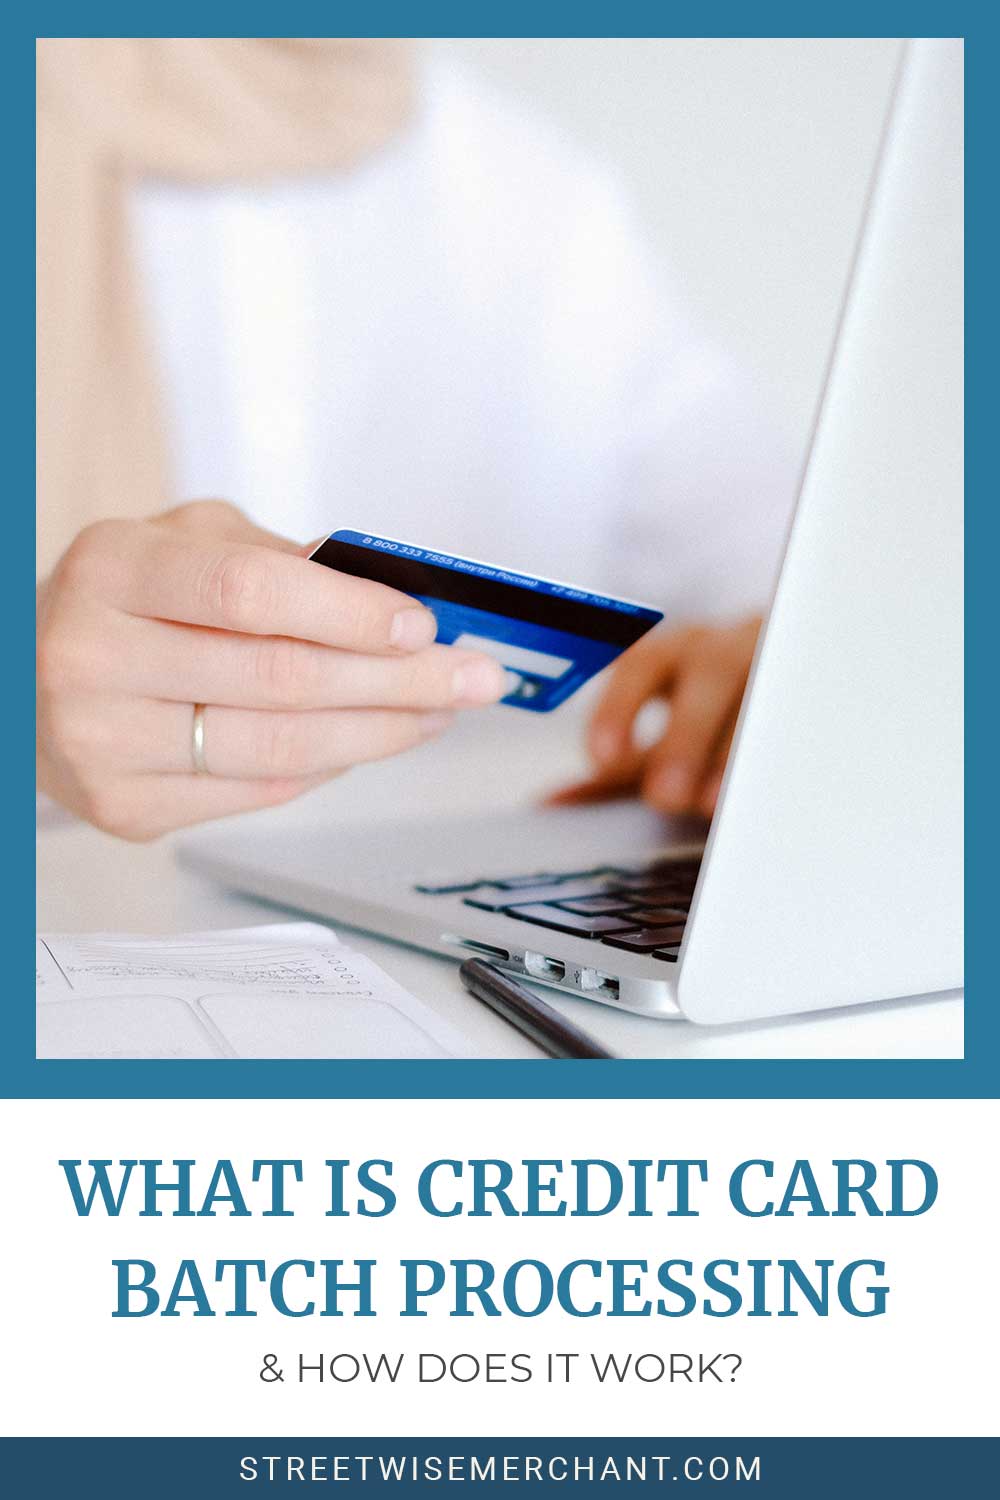 Woman holding a payment card in her hand and working in a laptop - What Is Credit Card Batch Processing & How Does It Work?